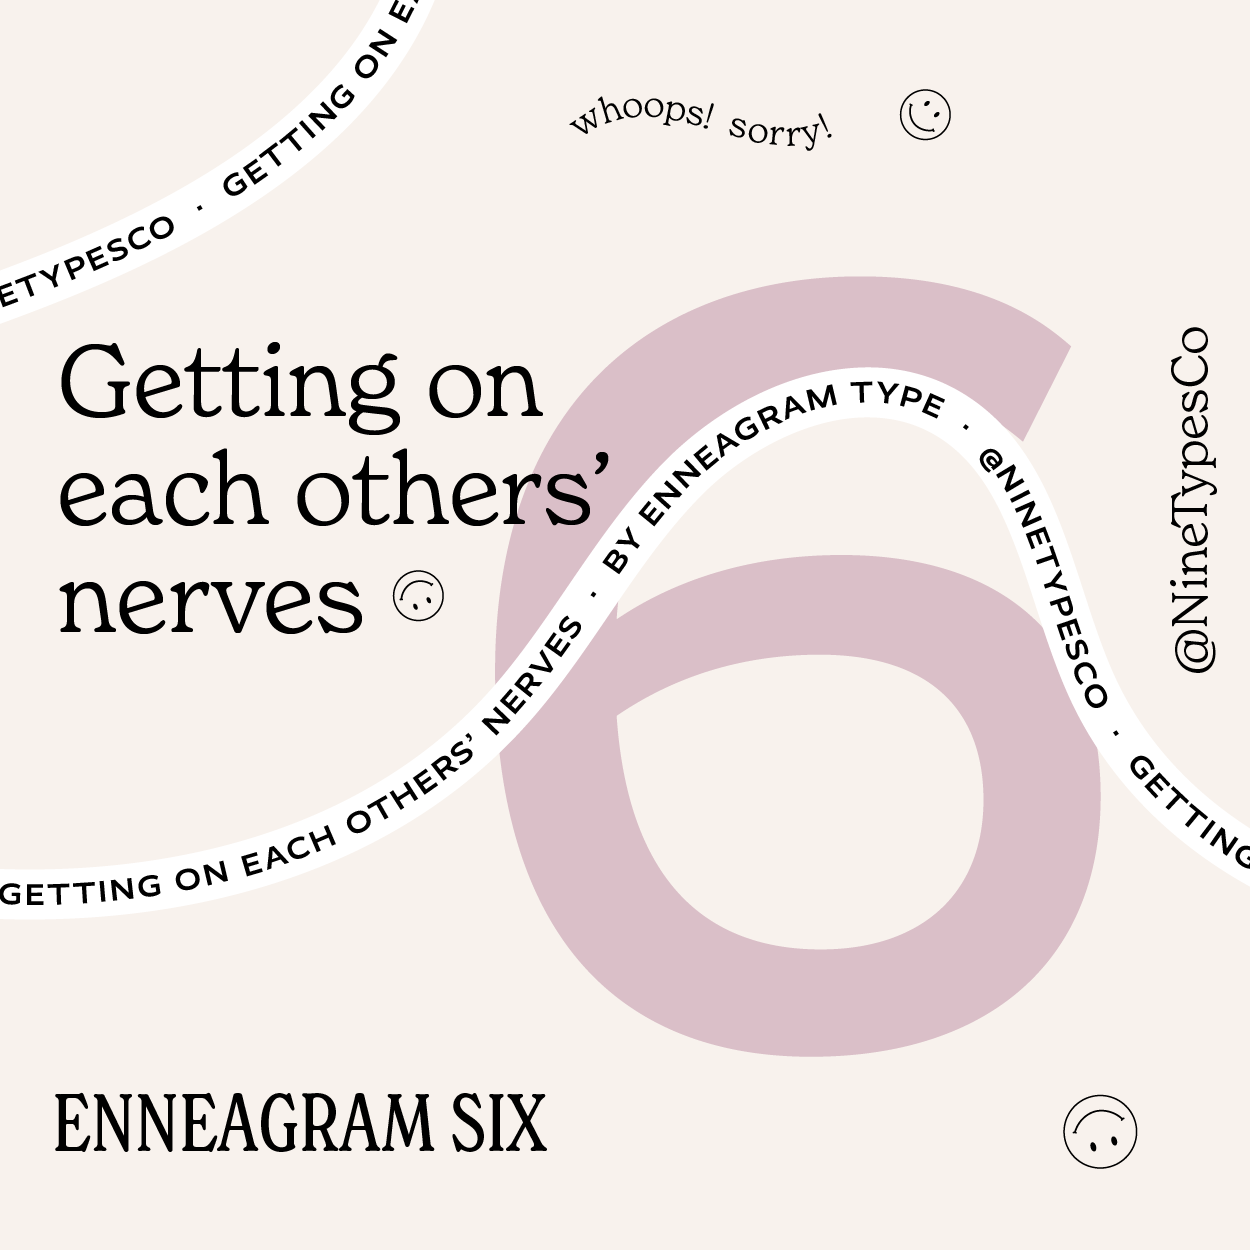 Getting on each others’ nerves by Enneagram TypeEnneagram 6@0.5x.png